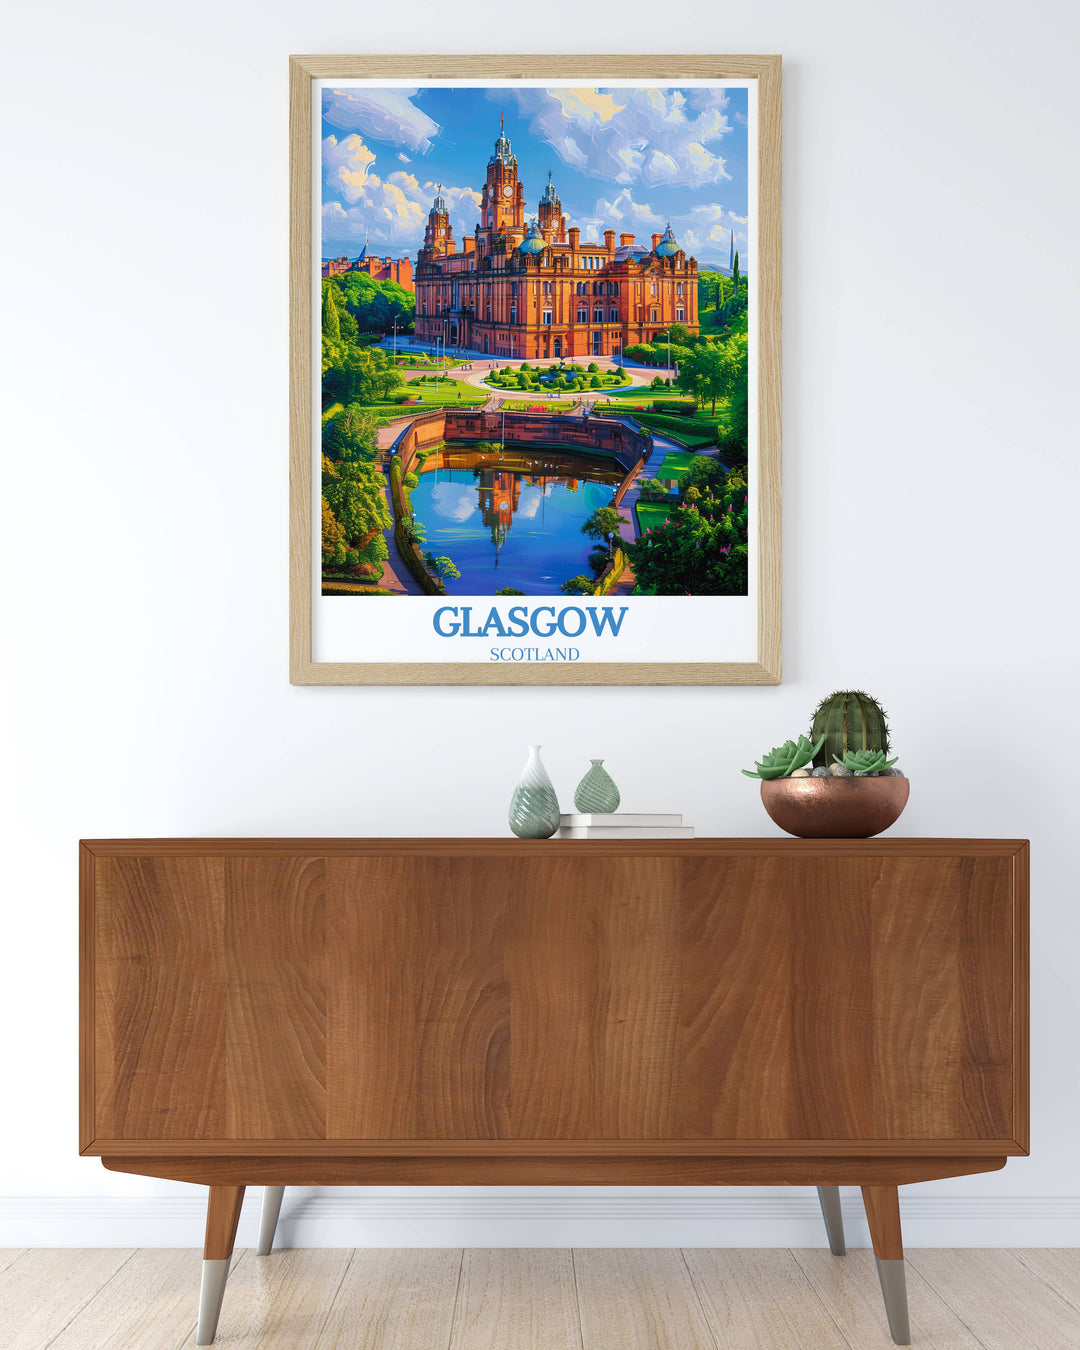 Glasgow prints capture the citys vibrant life and culture, making them essential pieces for your Glasgow travel wall art collection, adding a unique touch to home décor for Glasgow and Scotland art enthusiasts.